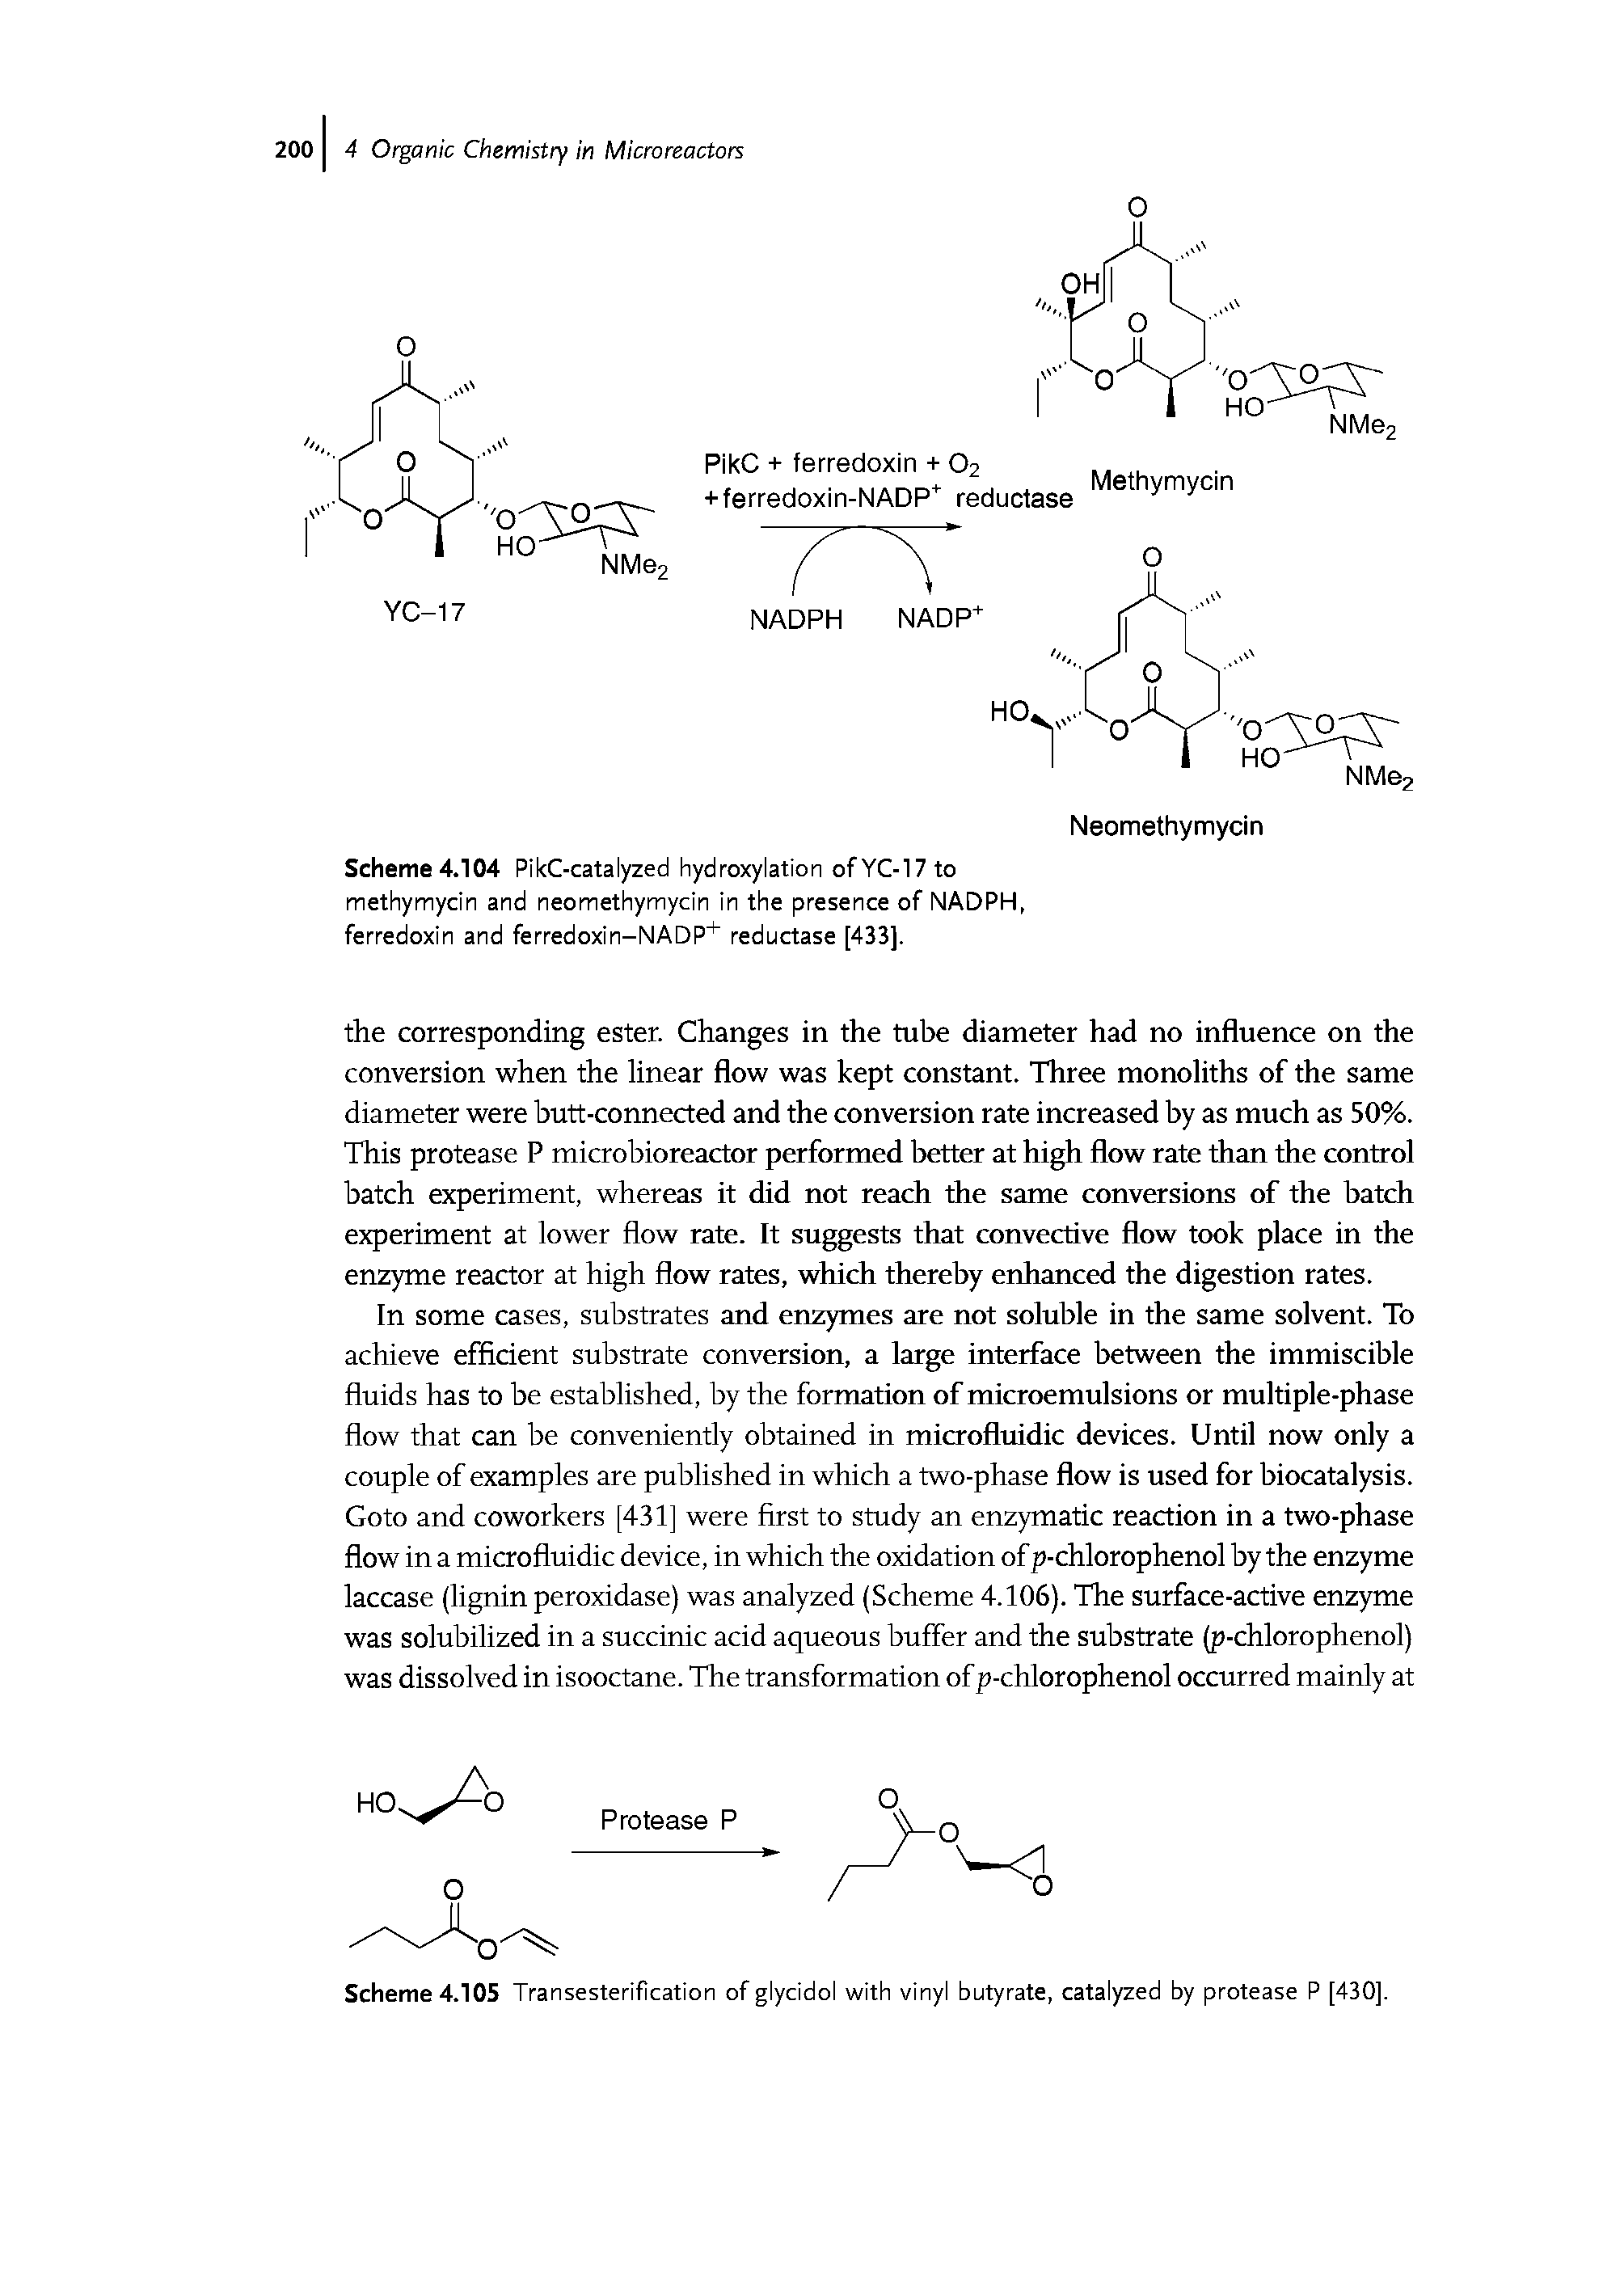 Scheme 4.104 PikC-catalyzed hydroxylation ofYC-17 to methymycin and neomethymycin in the presence of NADPH, ferredoxin and ferredoxin-NADP+ reductase [433].